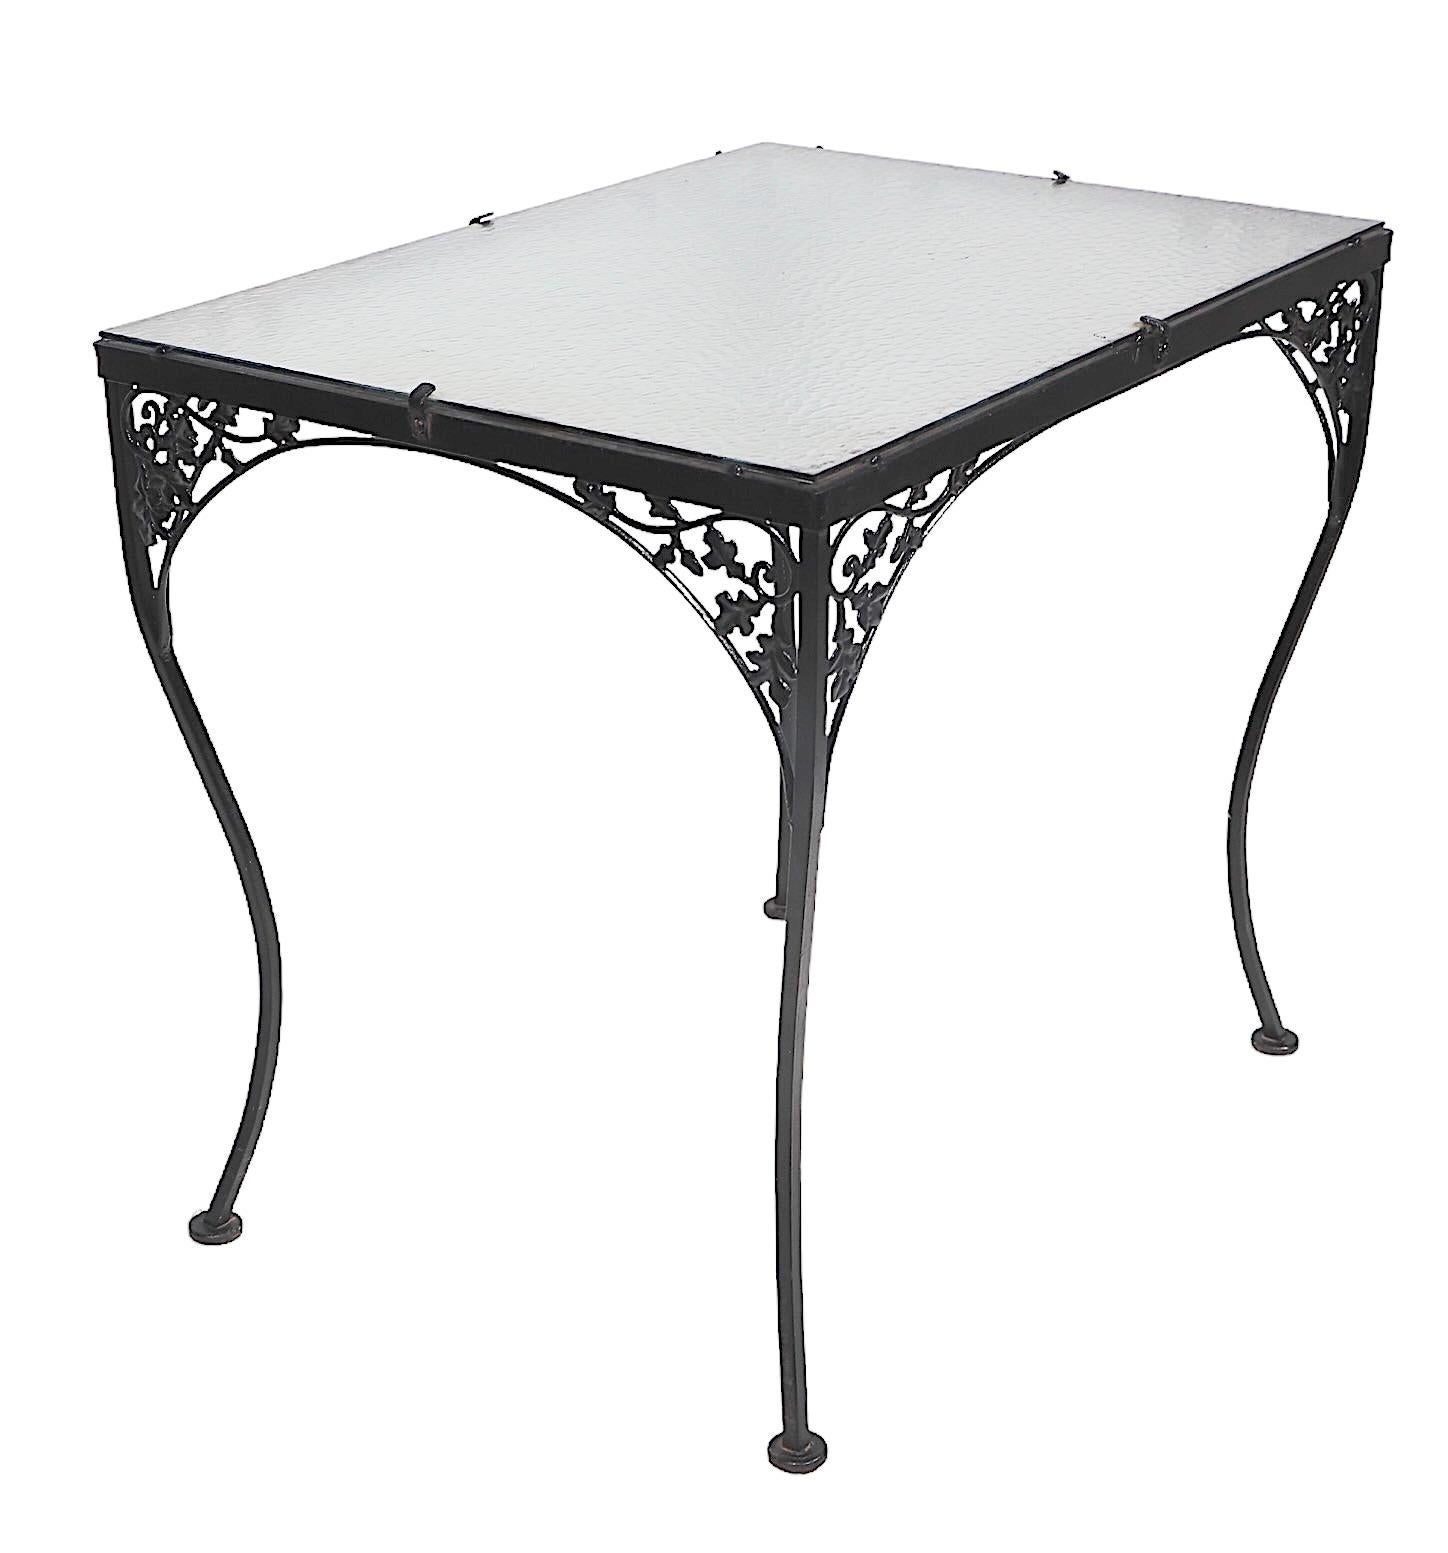 Ornate Wrought Iron and Glass Garden Patio Poolside Dining Table att. to Woodard For Sale 2